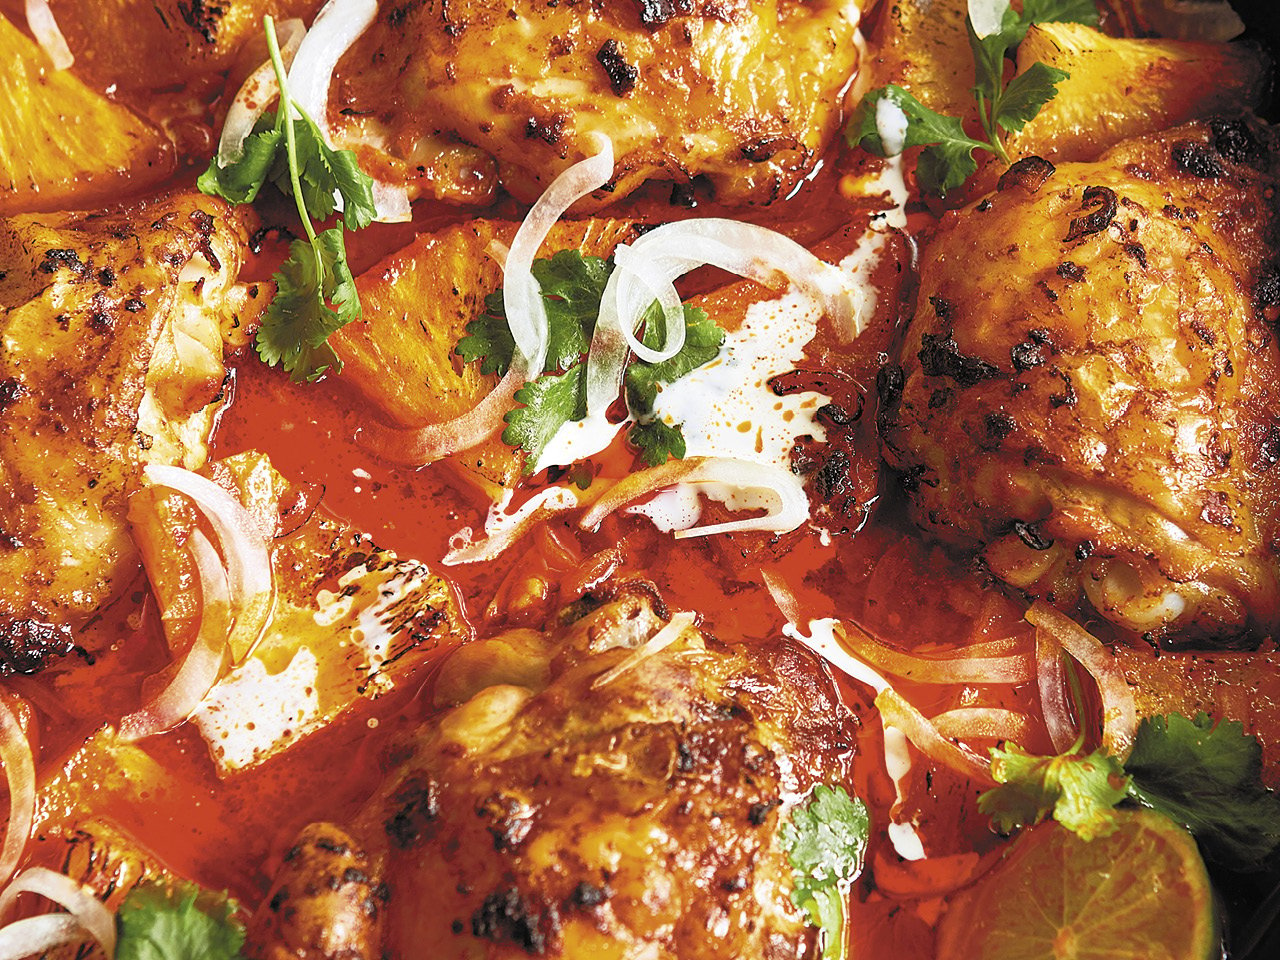 close up of cooked chicken pieces tossed in brown red sauce with drizzles of white sauce and green leaves on top.